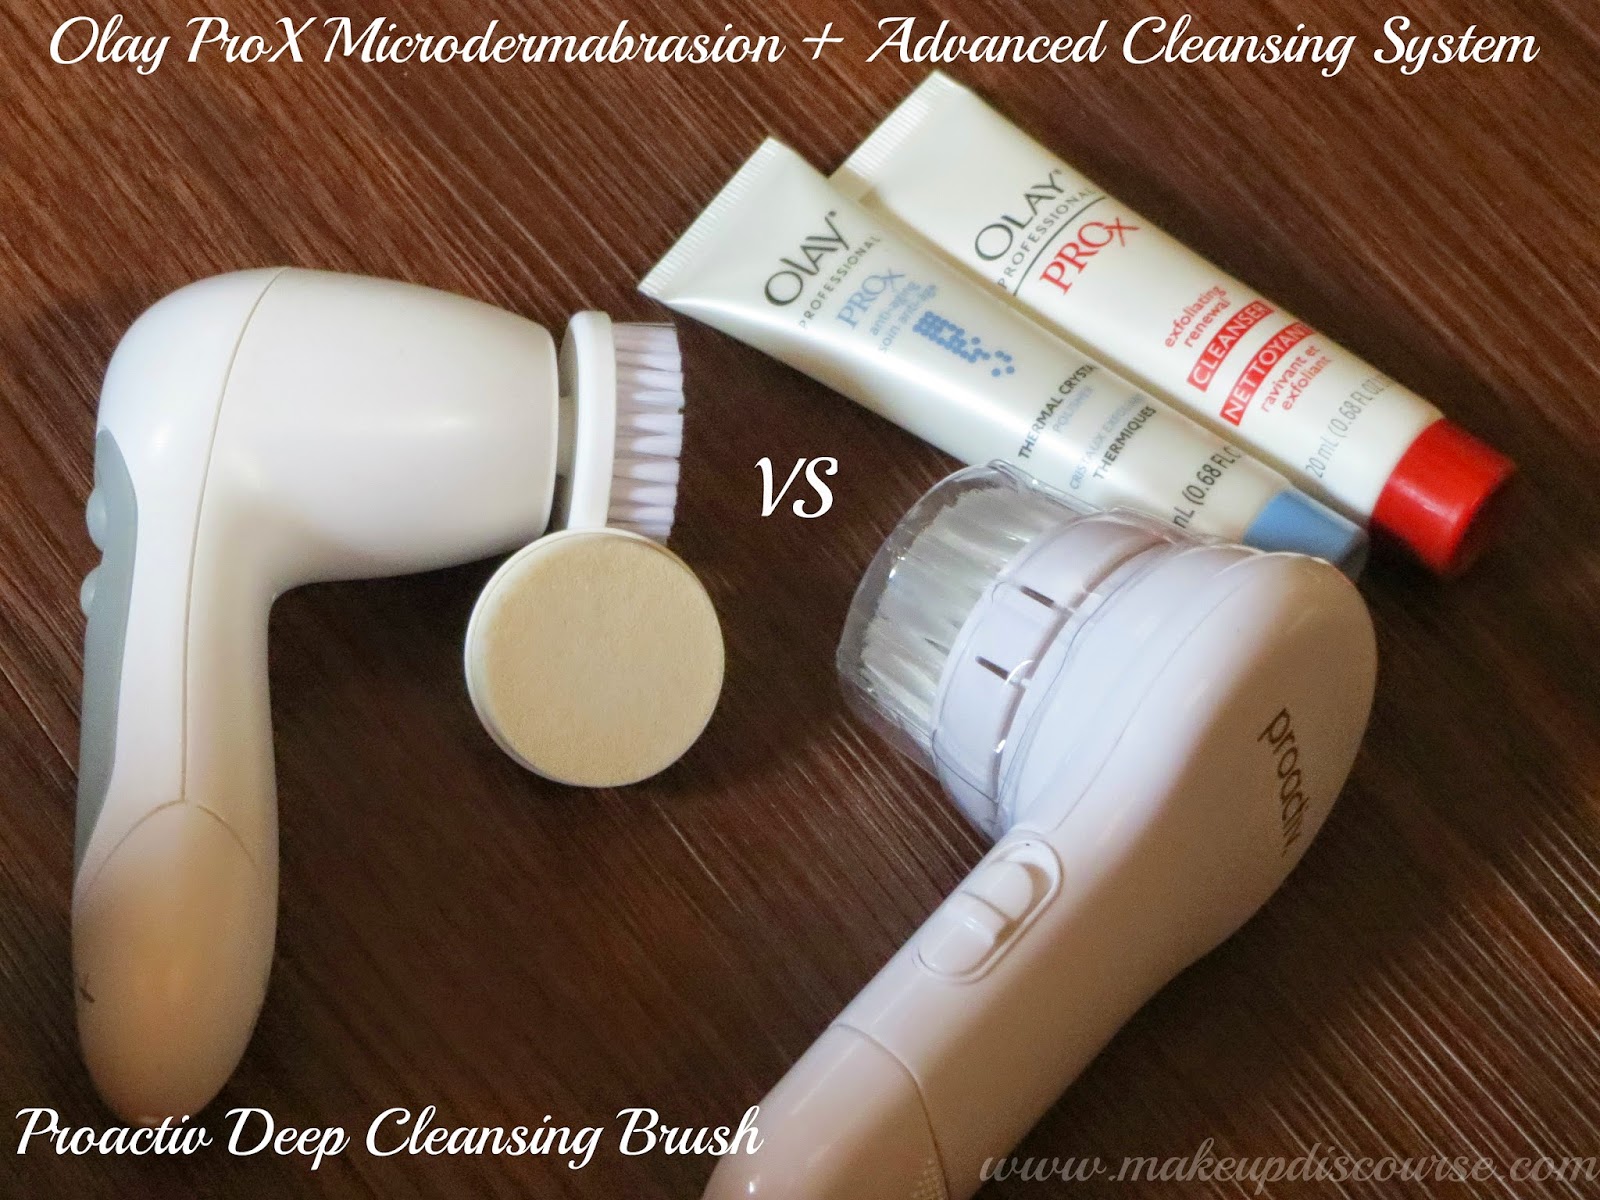 Olay ProX Microdermabrasion + Advanced Cleansing System Comparison Review India